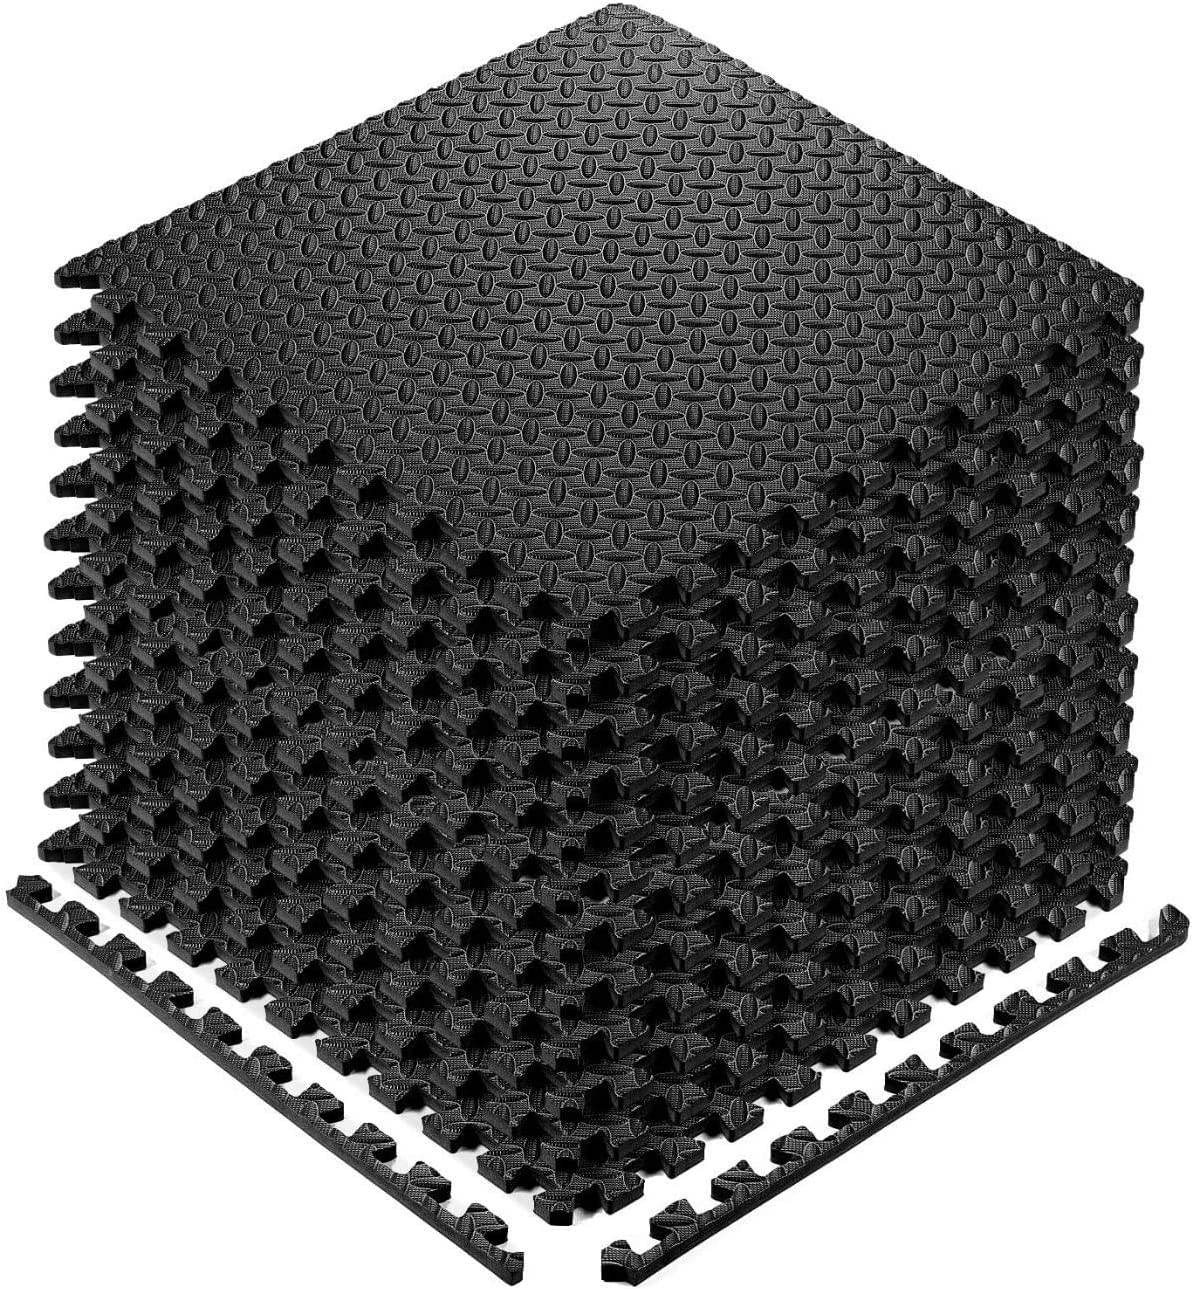 Walsai Exercise Puzzle Foam Mats